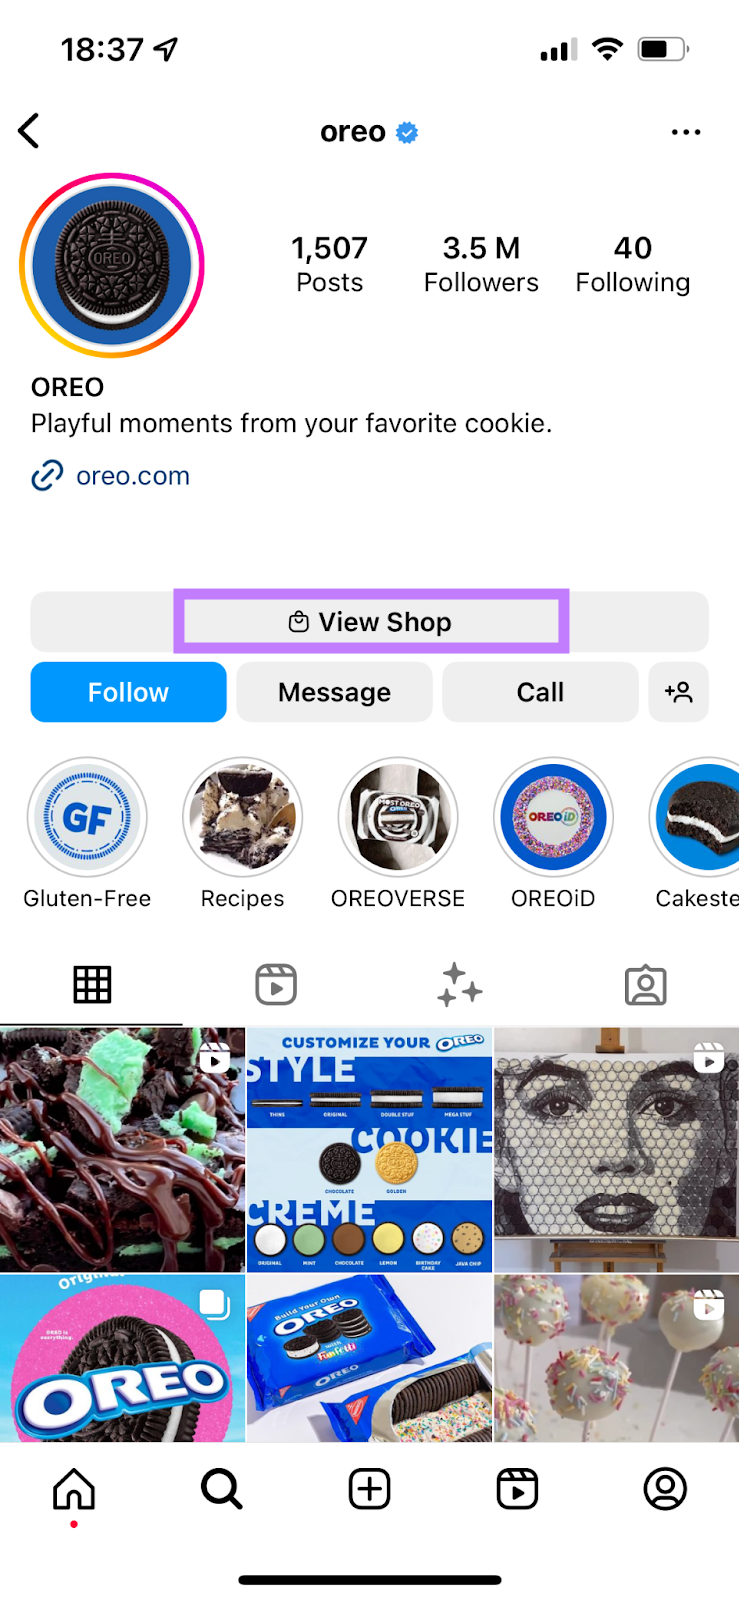 Oreo's Instagram page with "View Shop" button highlighted